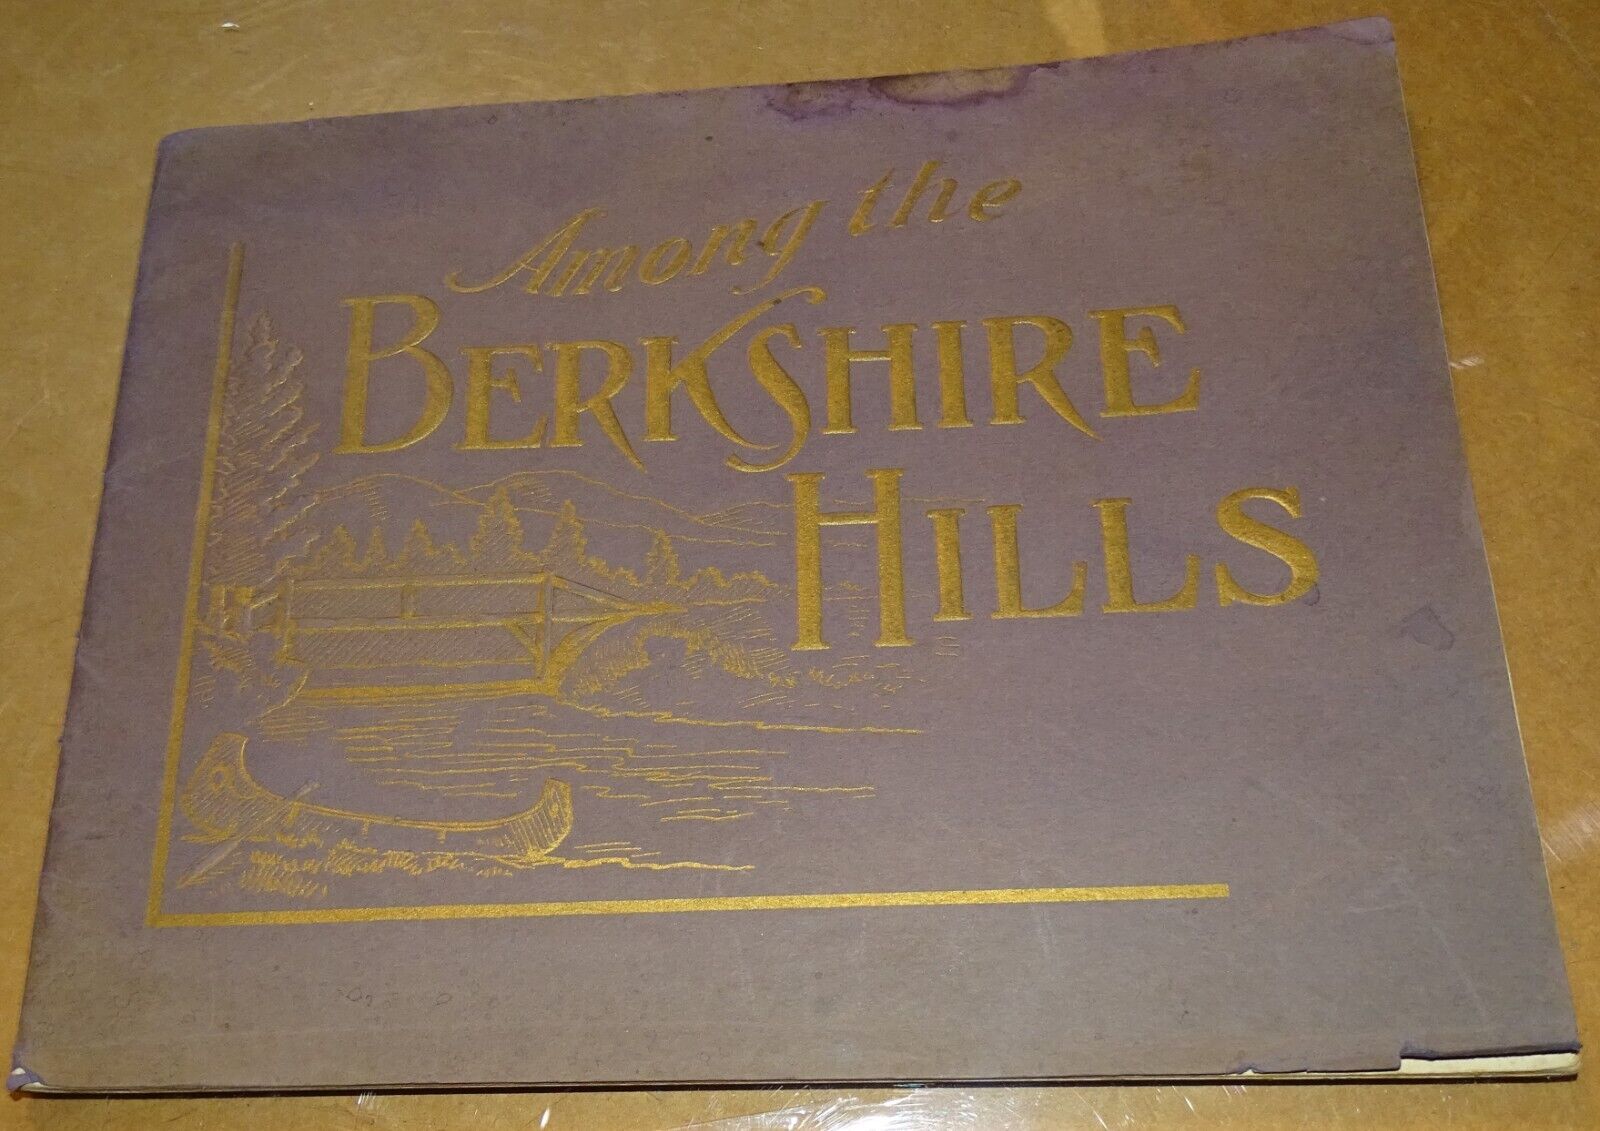 Among The Berkshire Hills photo-book (1909 Pittsfield Mass.) BADLY STAINED